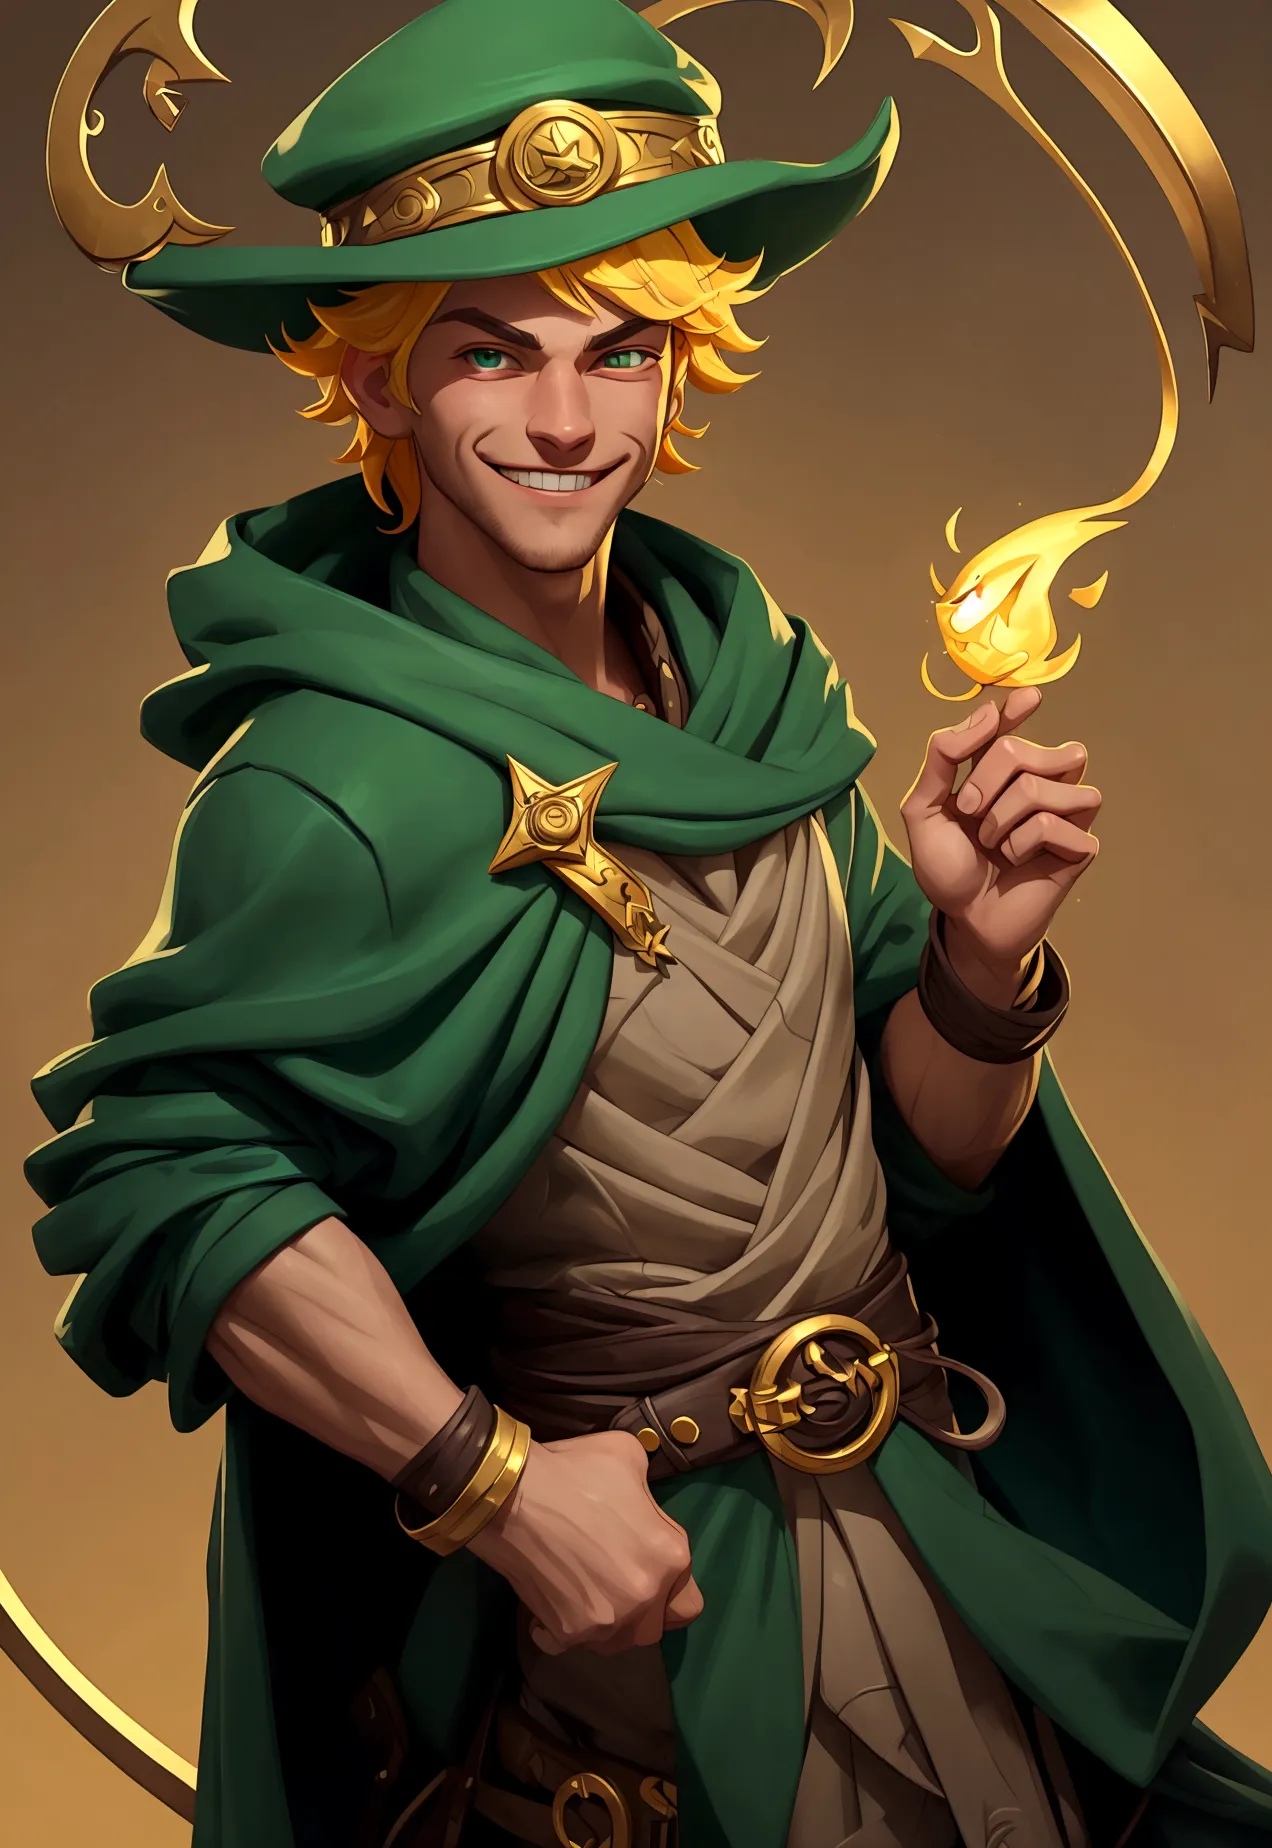 Jax is a charming, adventurous guy with a mischievous grin. He wears a bright green hat and a matching cloak with a golden clasp...